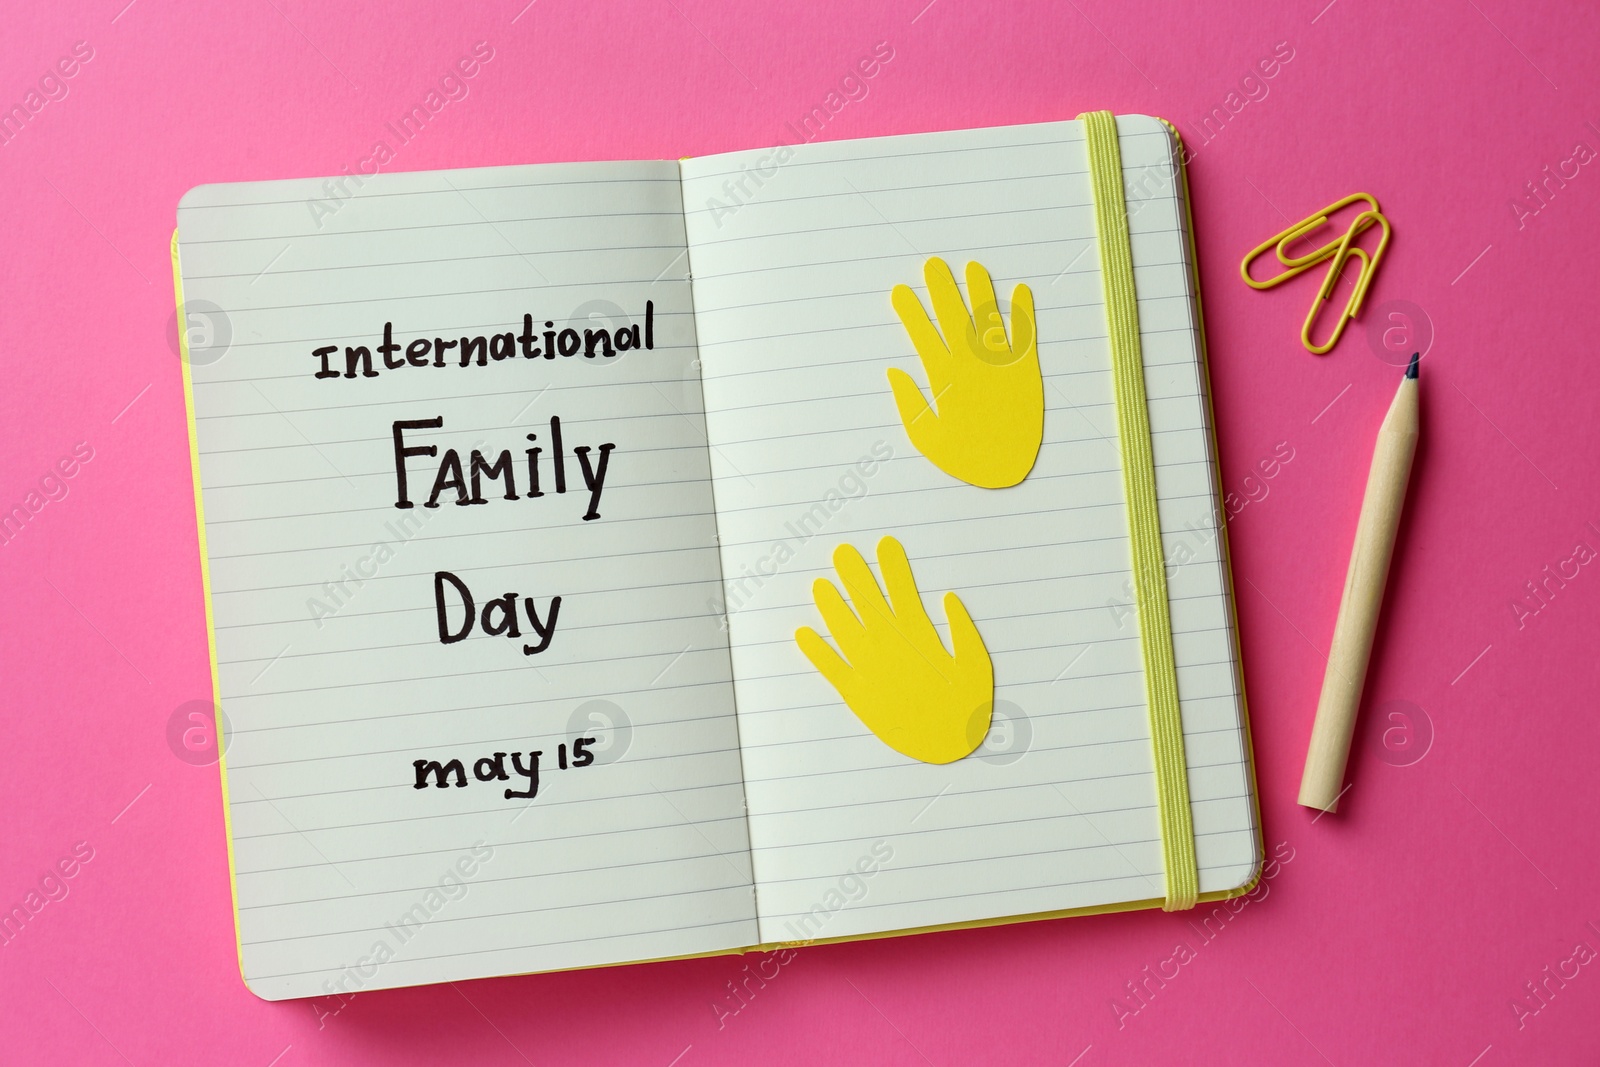 Photo of Notebook with text International Family Day May 15, pencil and paper clips on pink background, flat lay